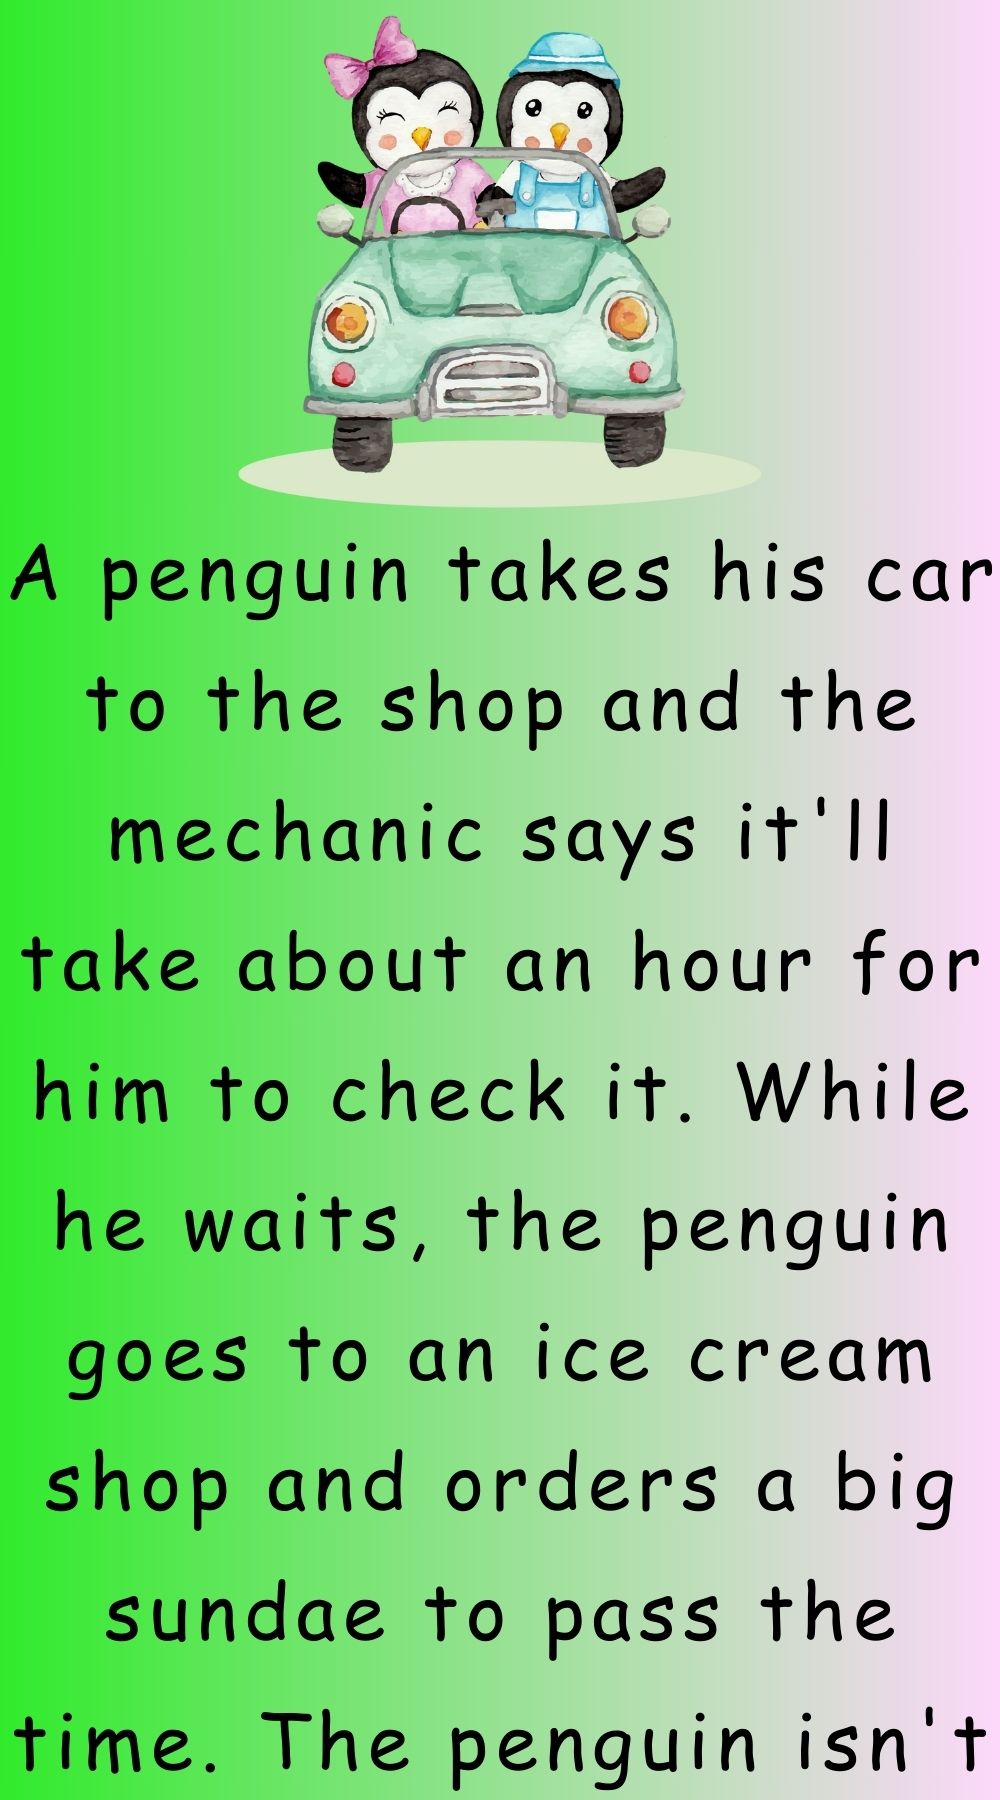 A penguin takes his car to the shop 